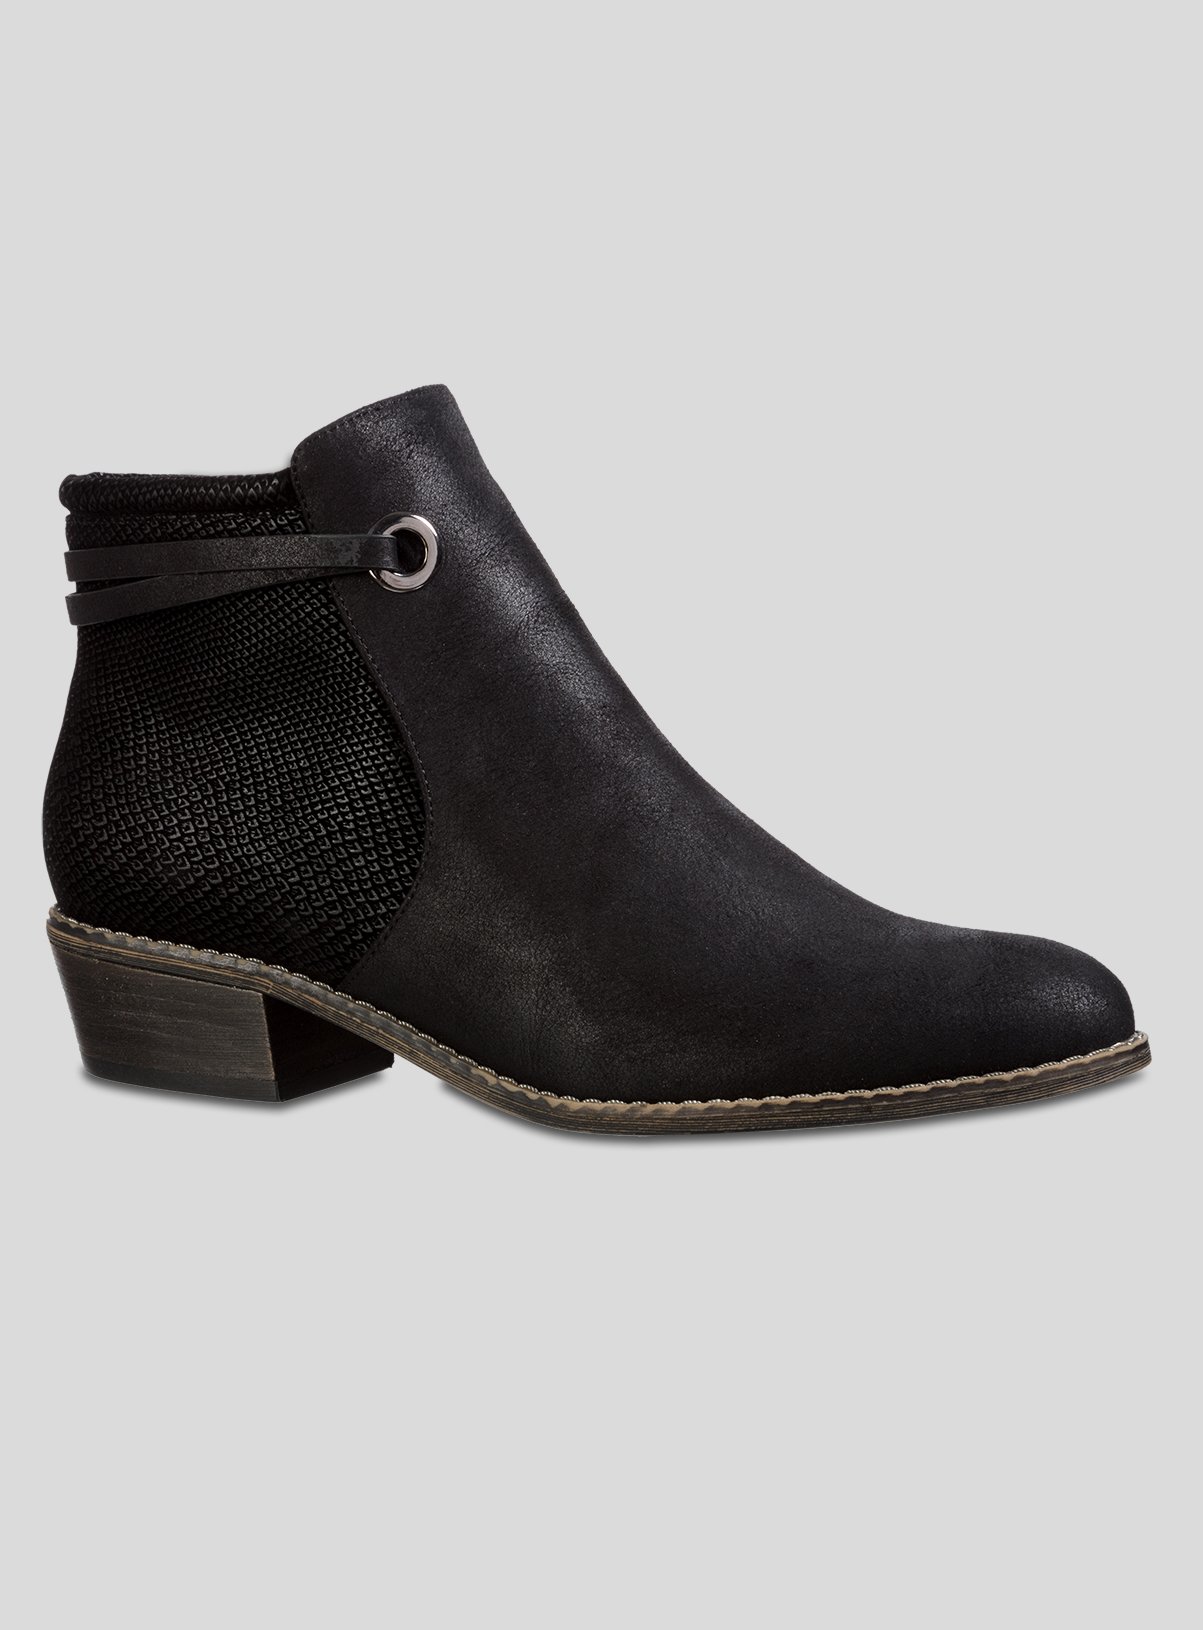 black ankle western boots